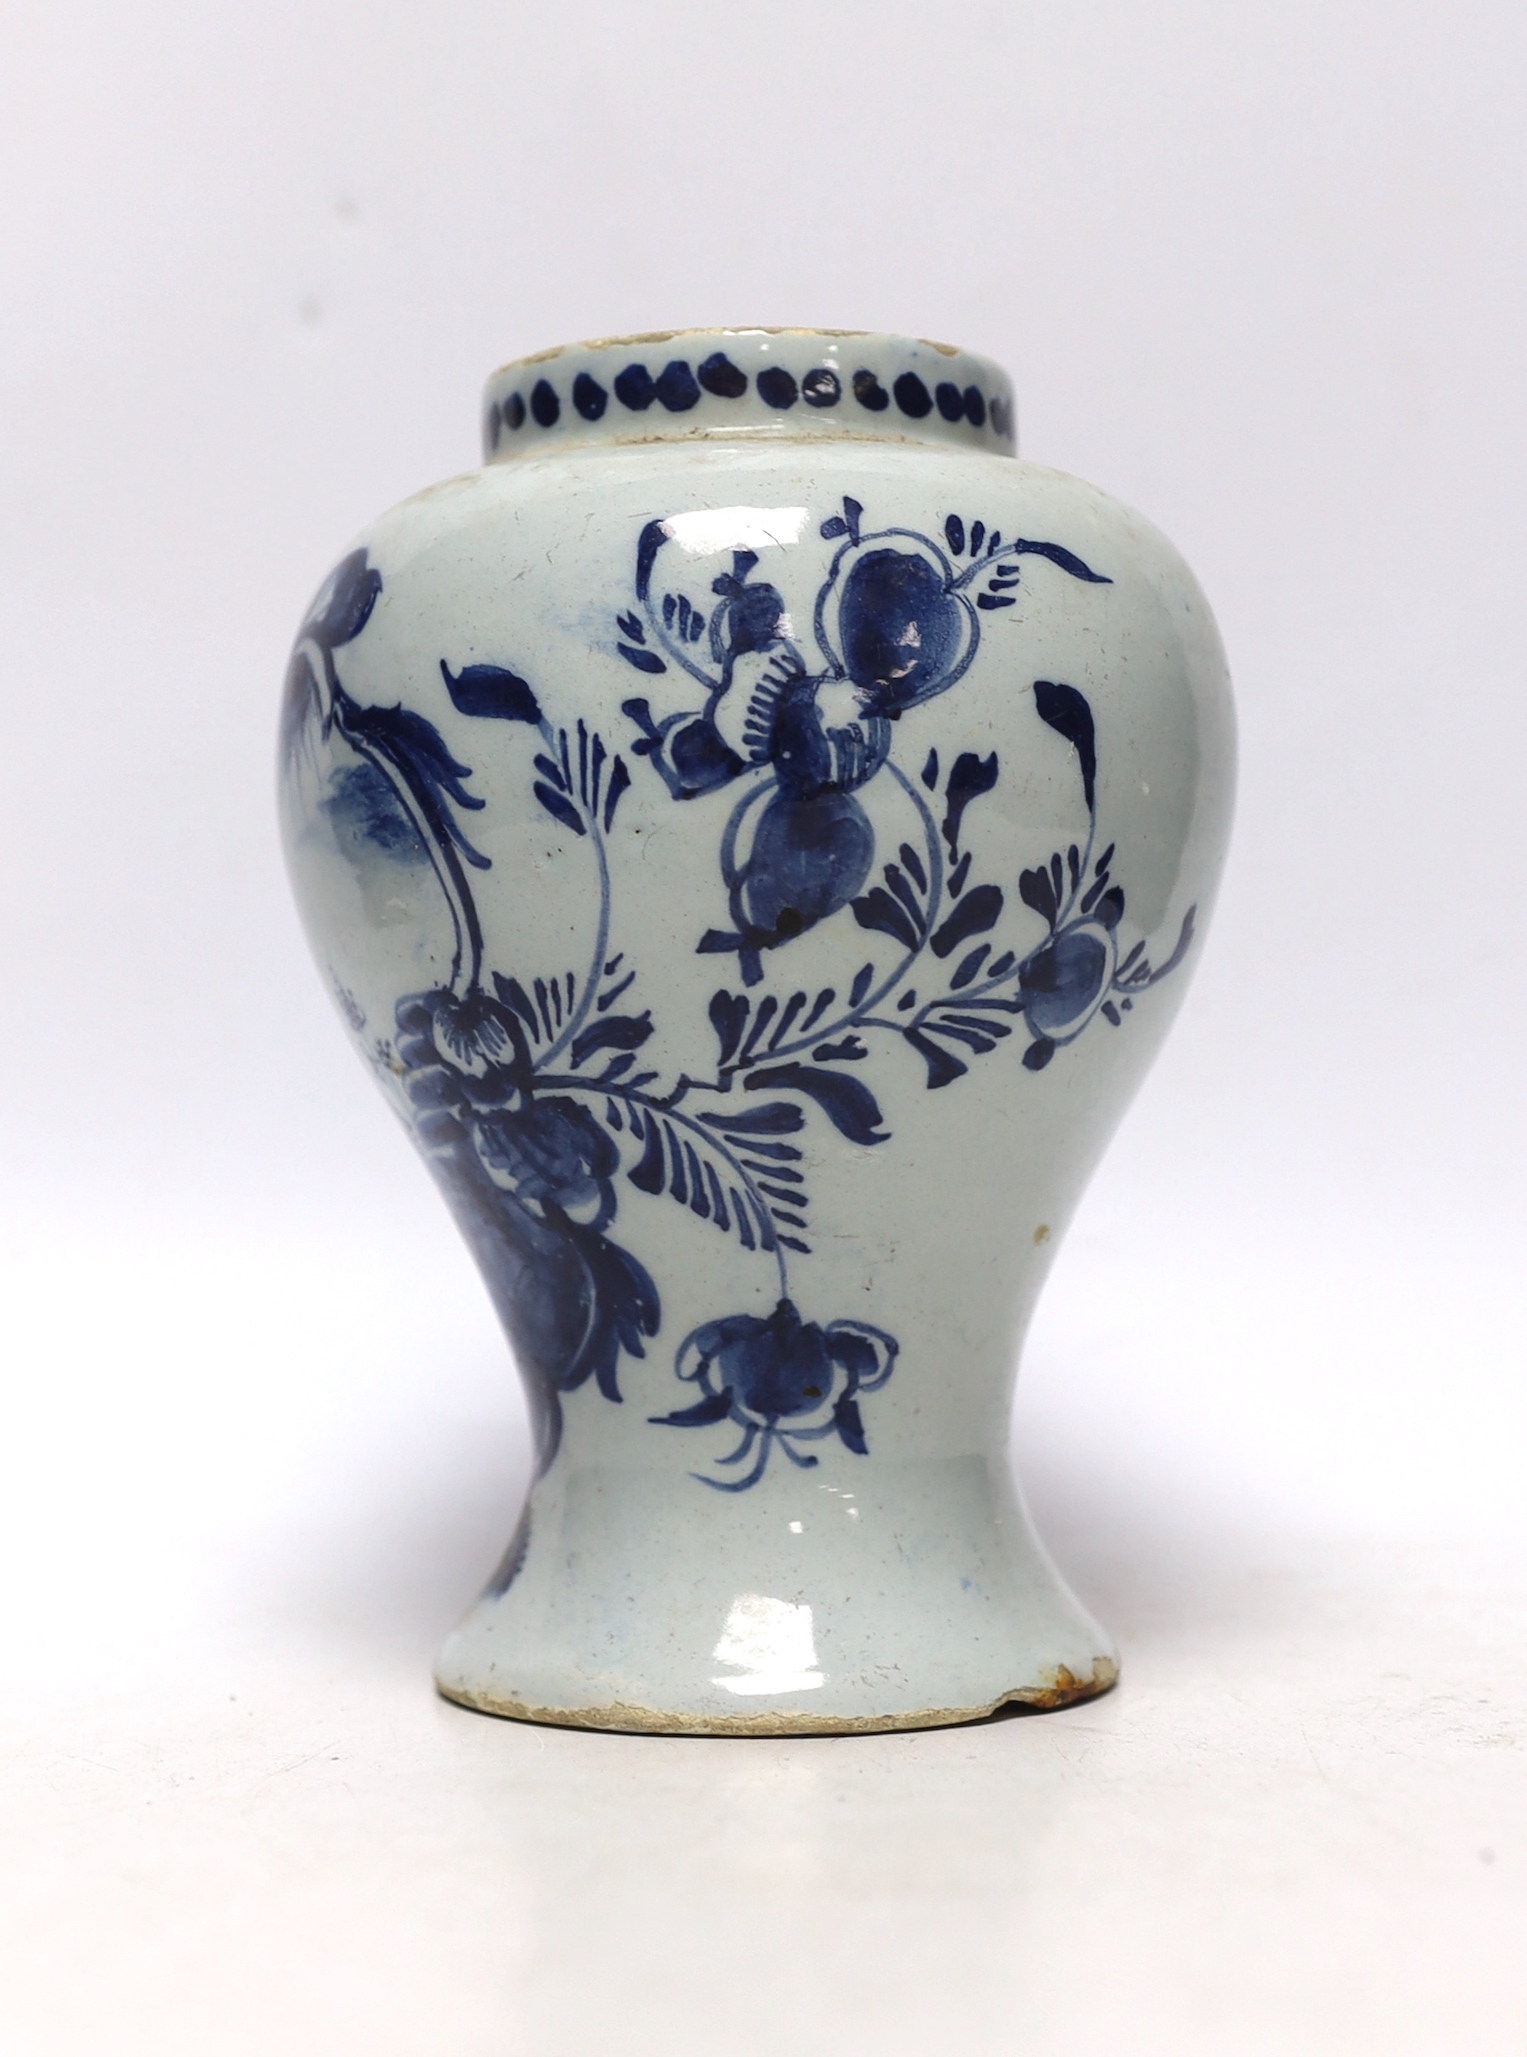 An 18th century Delft blue and white baluster vase, 17cm